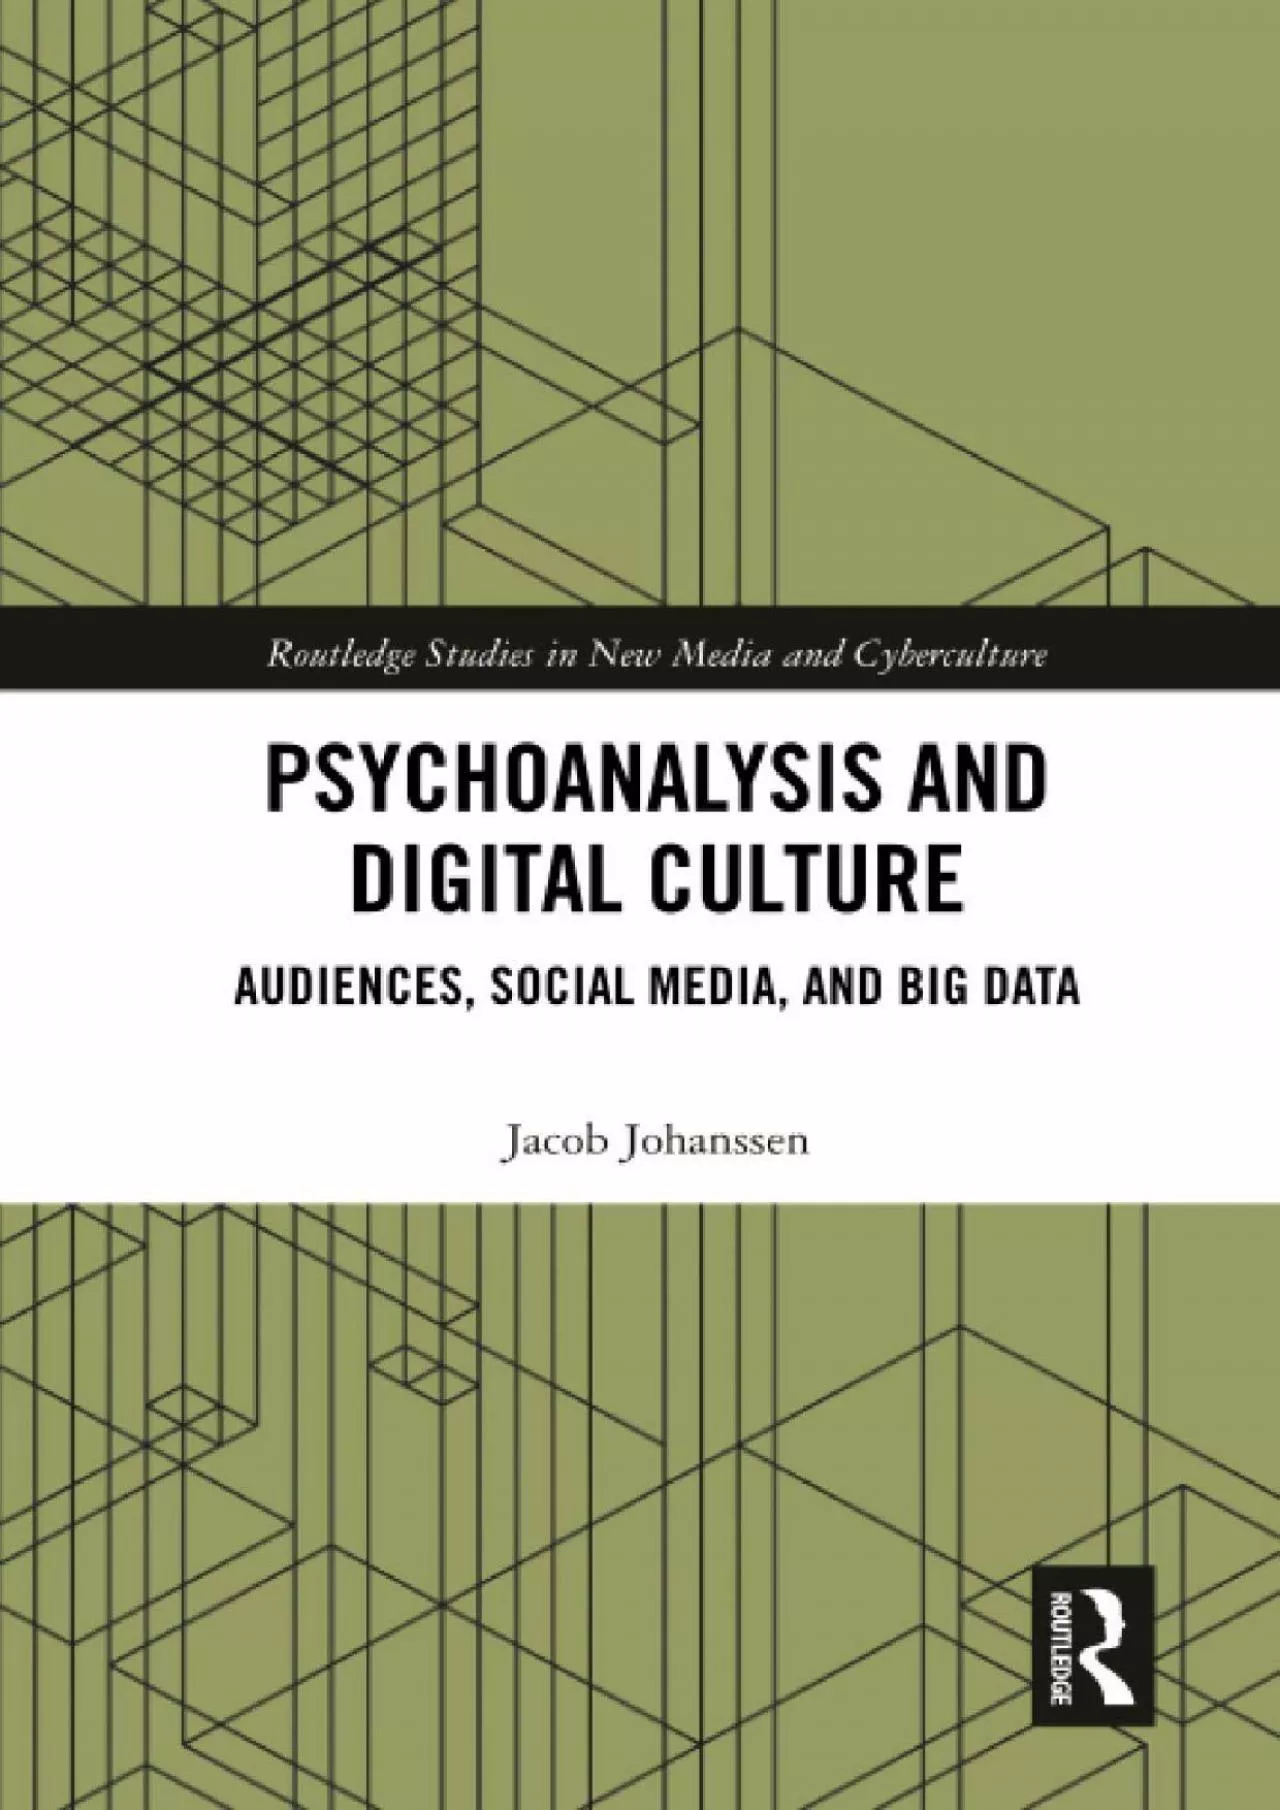 (READ)-Psychoanalysis and Digital Culture (Routledge Studies in New Media and Cyberculture)